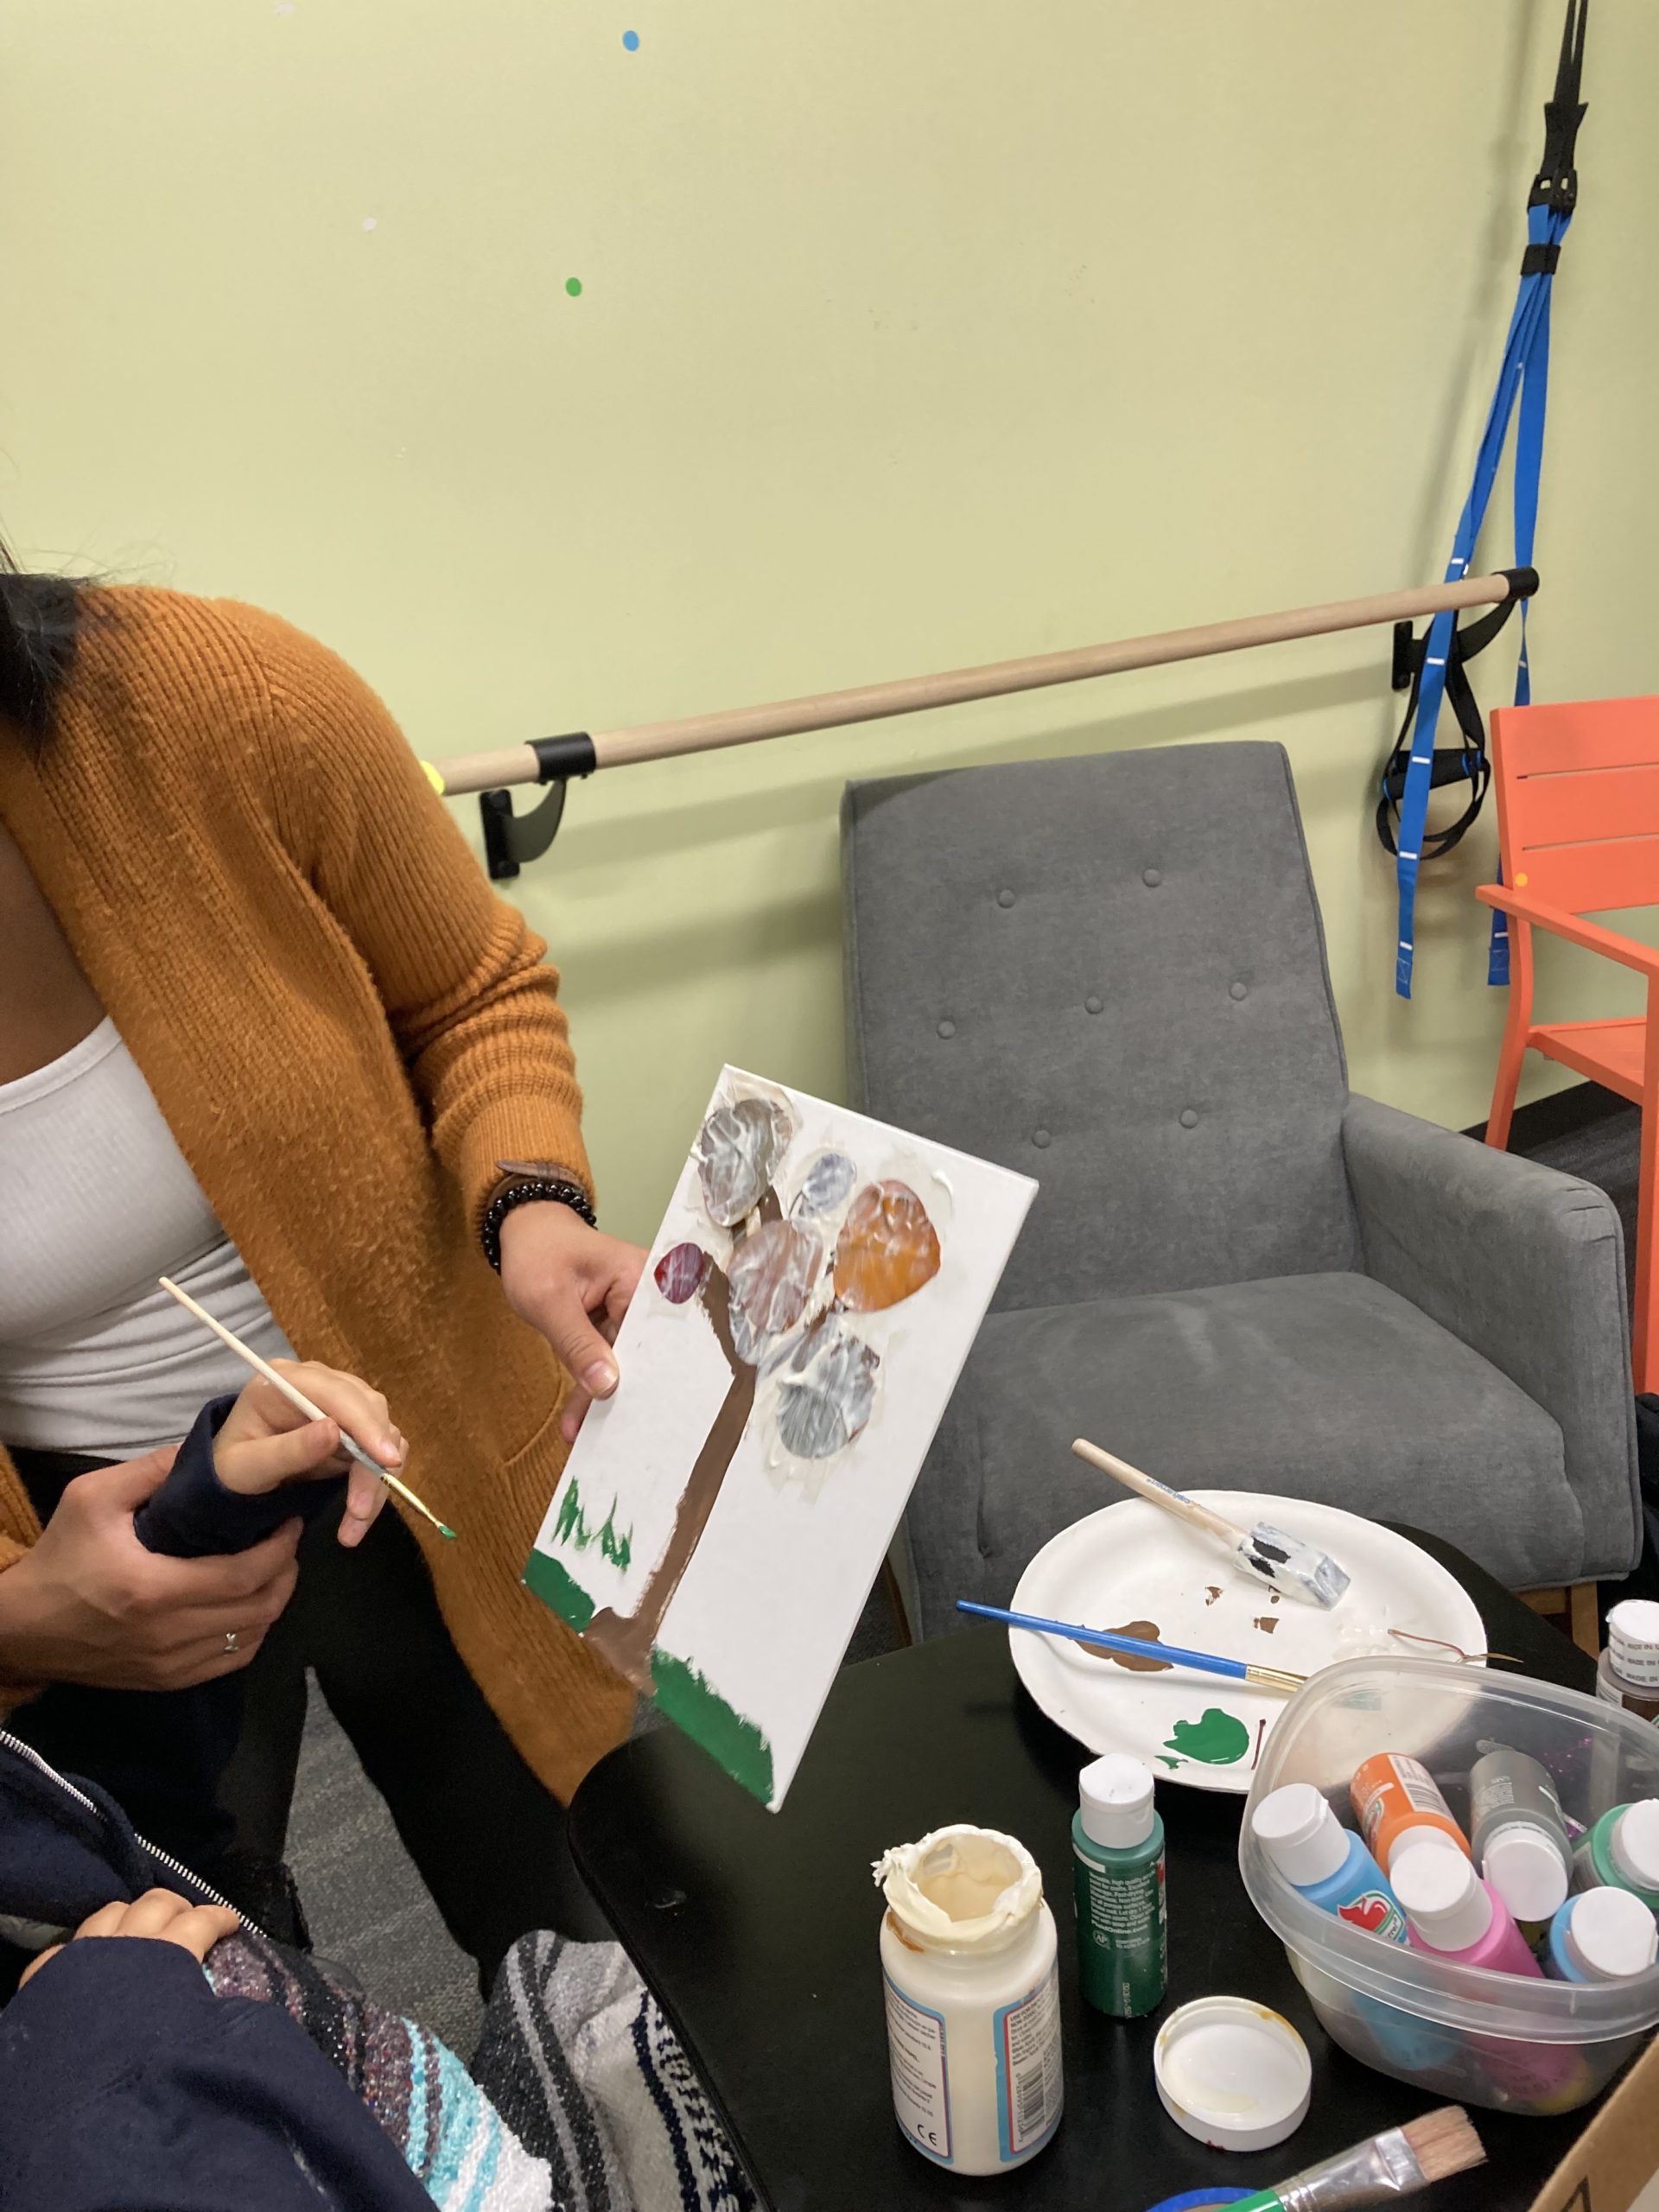 Bella Adlah paints during occupational therapy at Re+active Physical Therapy in California.